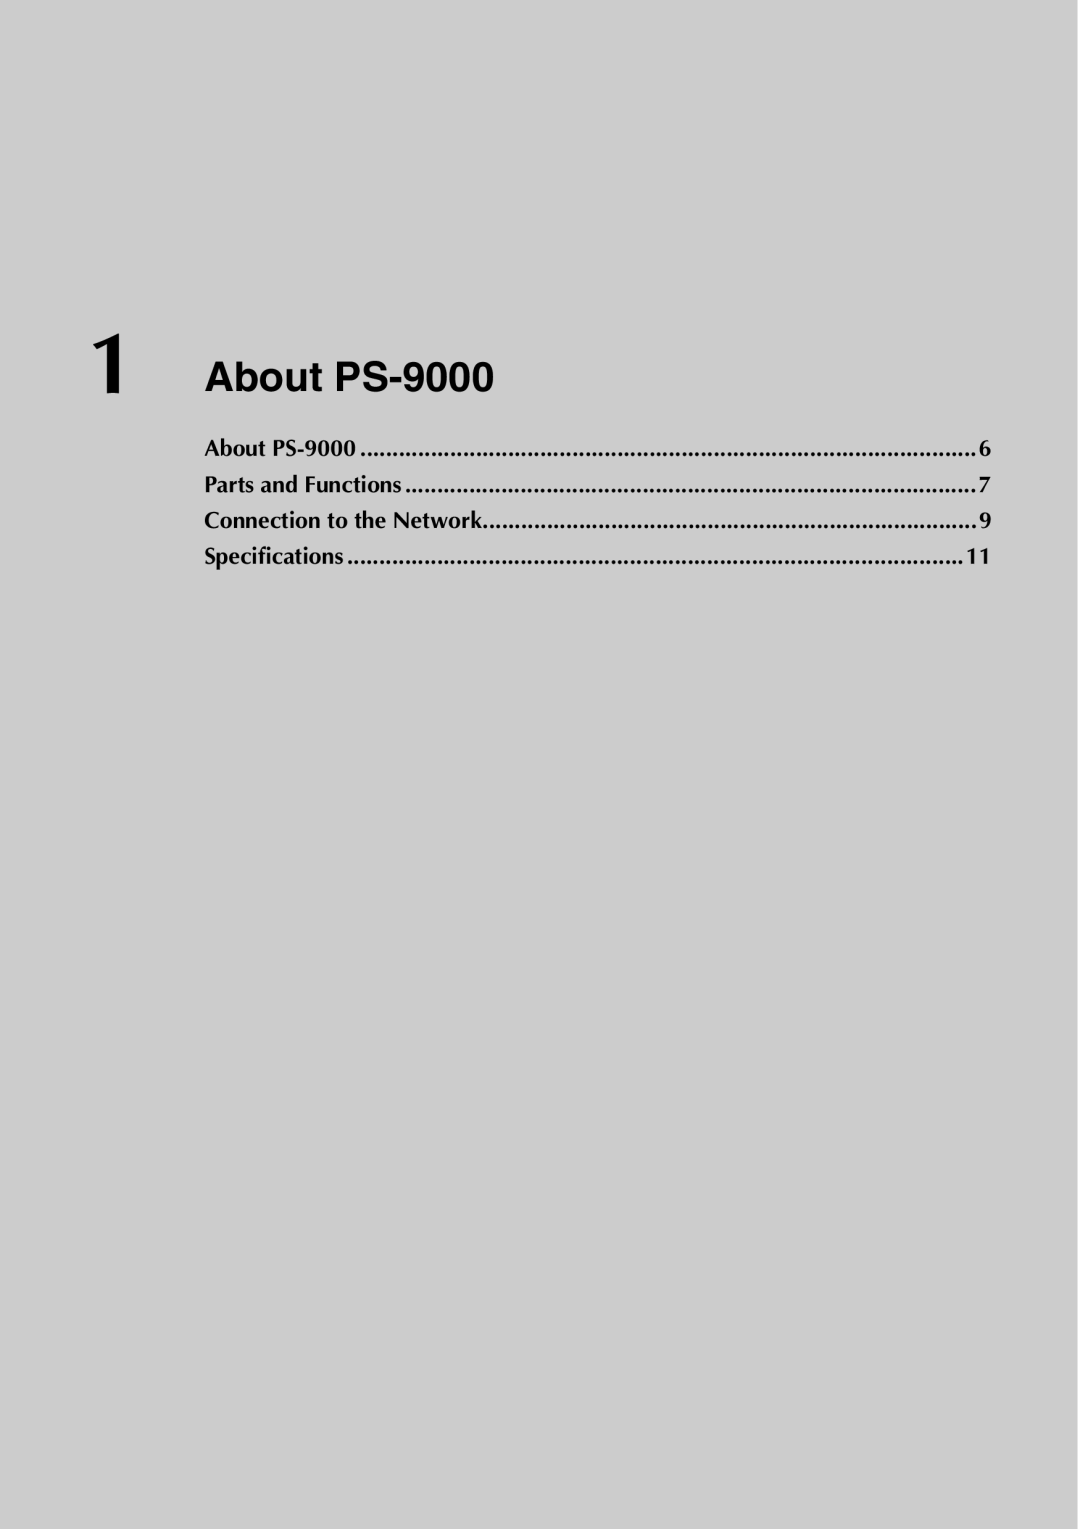 Brother user manual About PS-9000, Parts and Functions, Connection to the Network, Specifications 